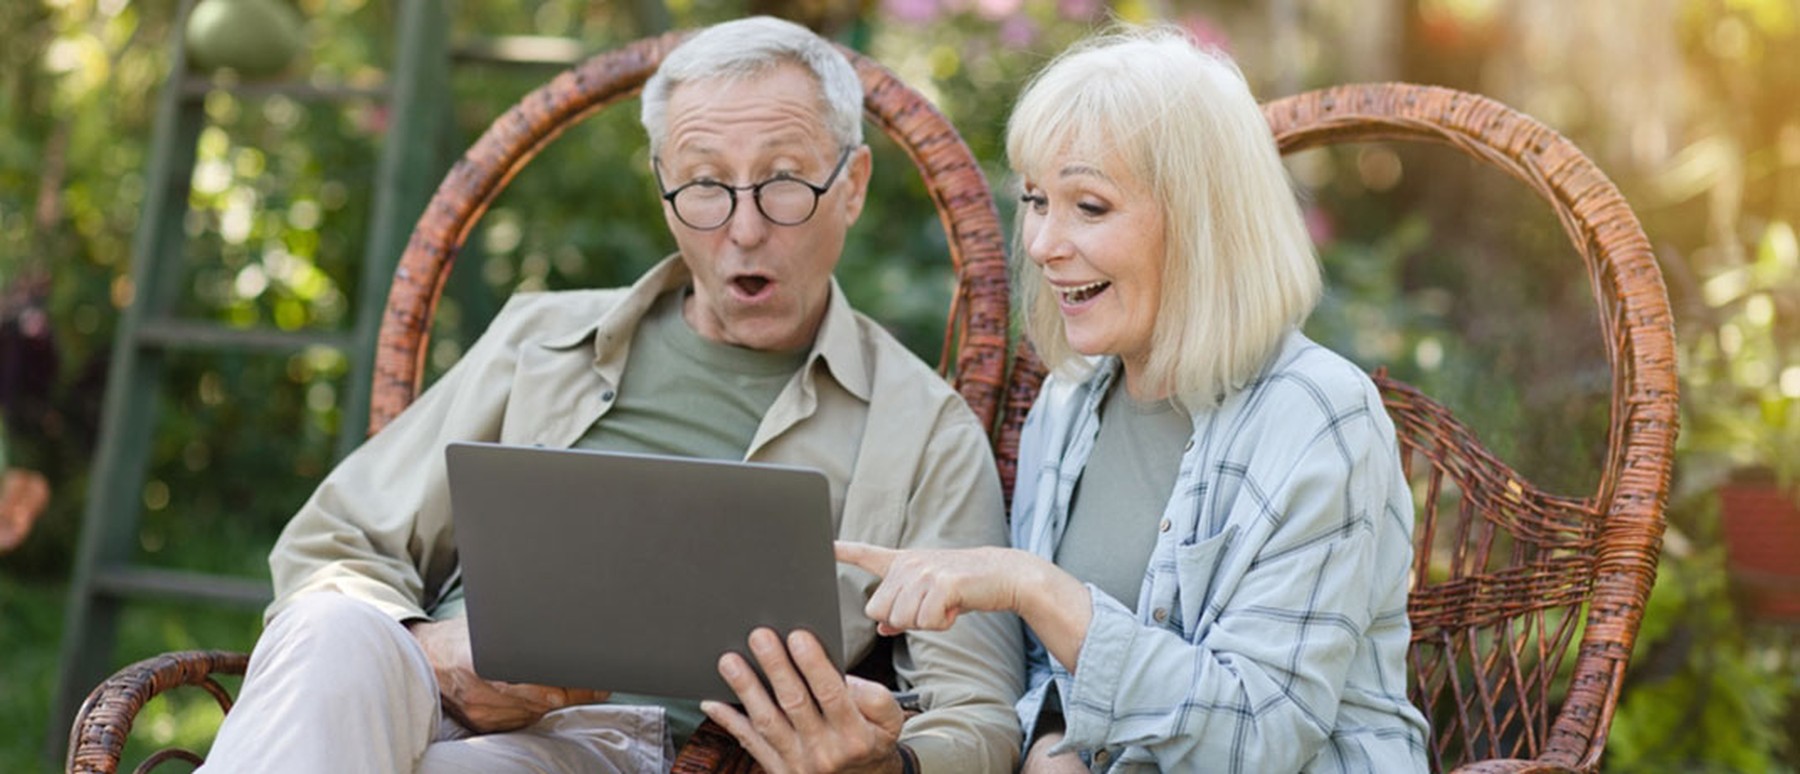 Older Couple Sitting in Chairs Outside Looking at Computer